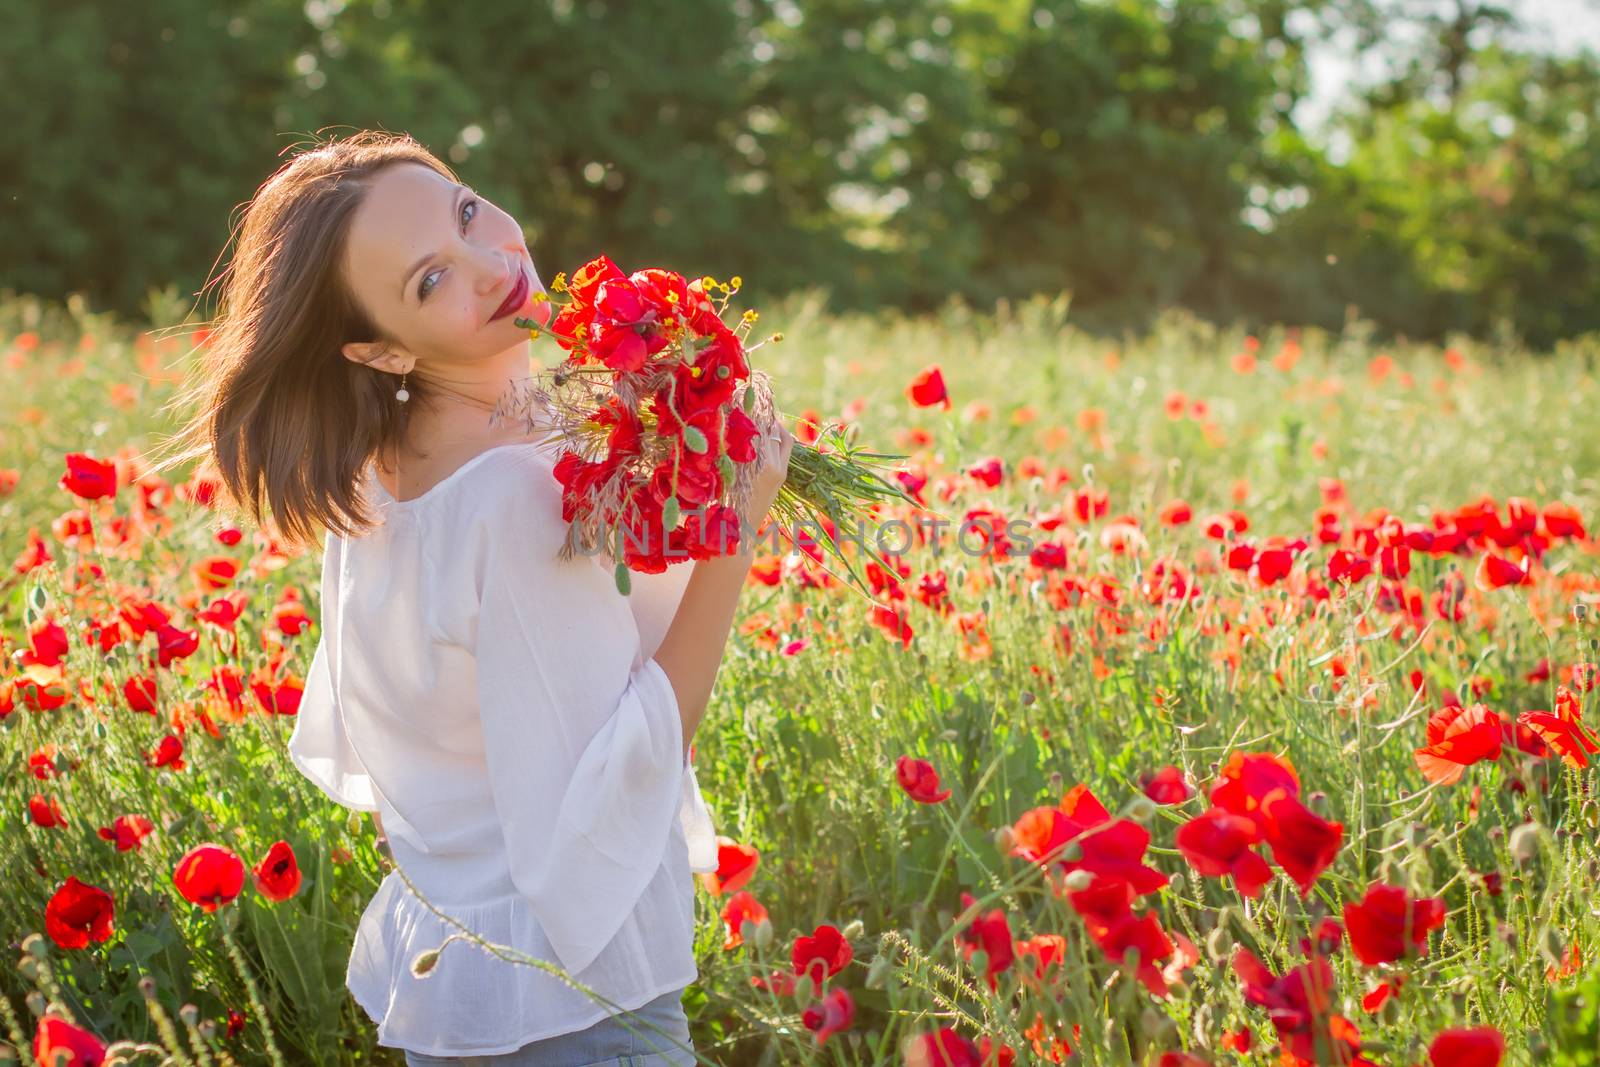 Woman with bouquet among poppies field at sunset